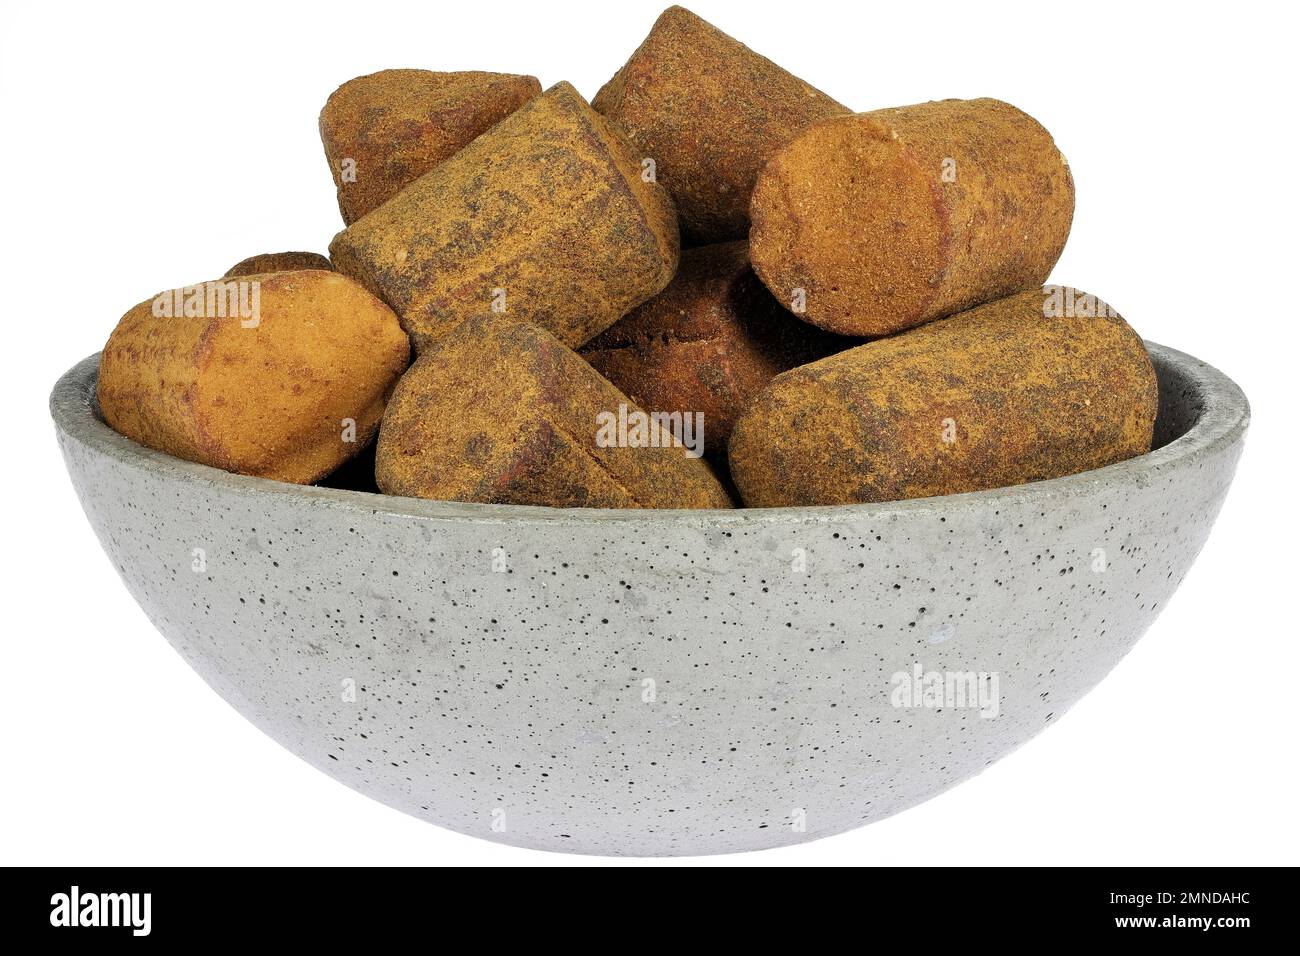 Dutch cinnamon candy sticks in a concrete bowl isolated on white background Stock Photo